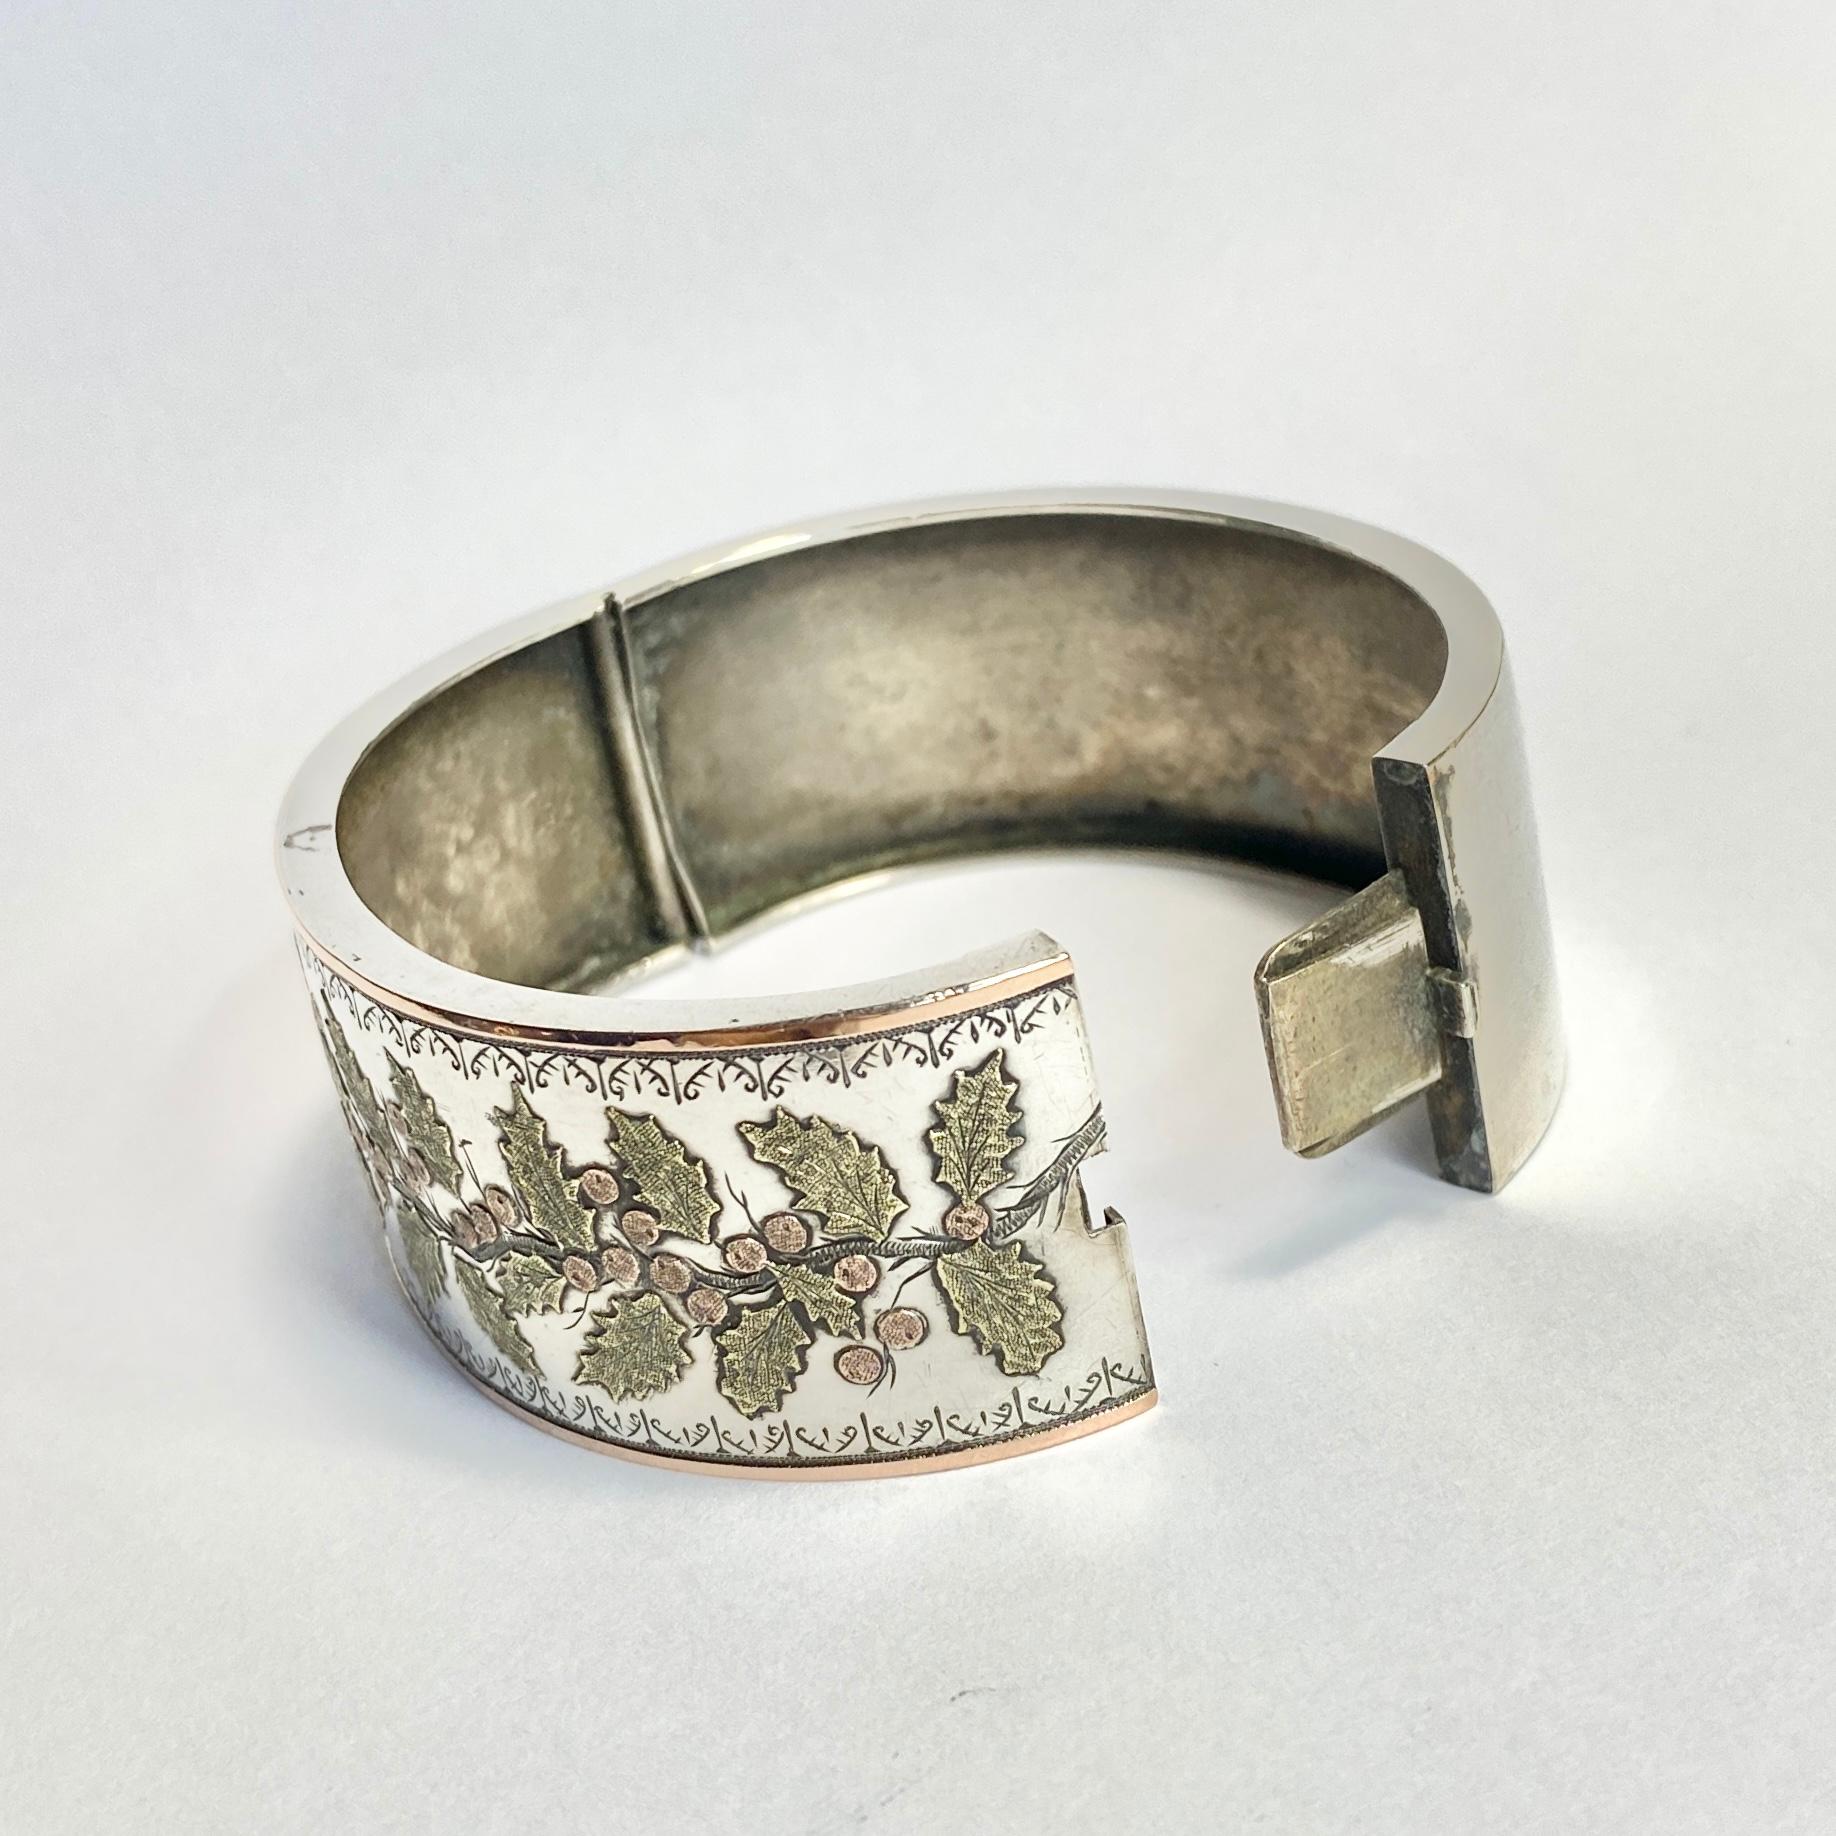 Edwardian Ornate Gold Detailed Silver Bangle In Good Condition For Sale In Chipping Campden, GB